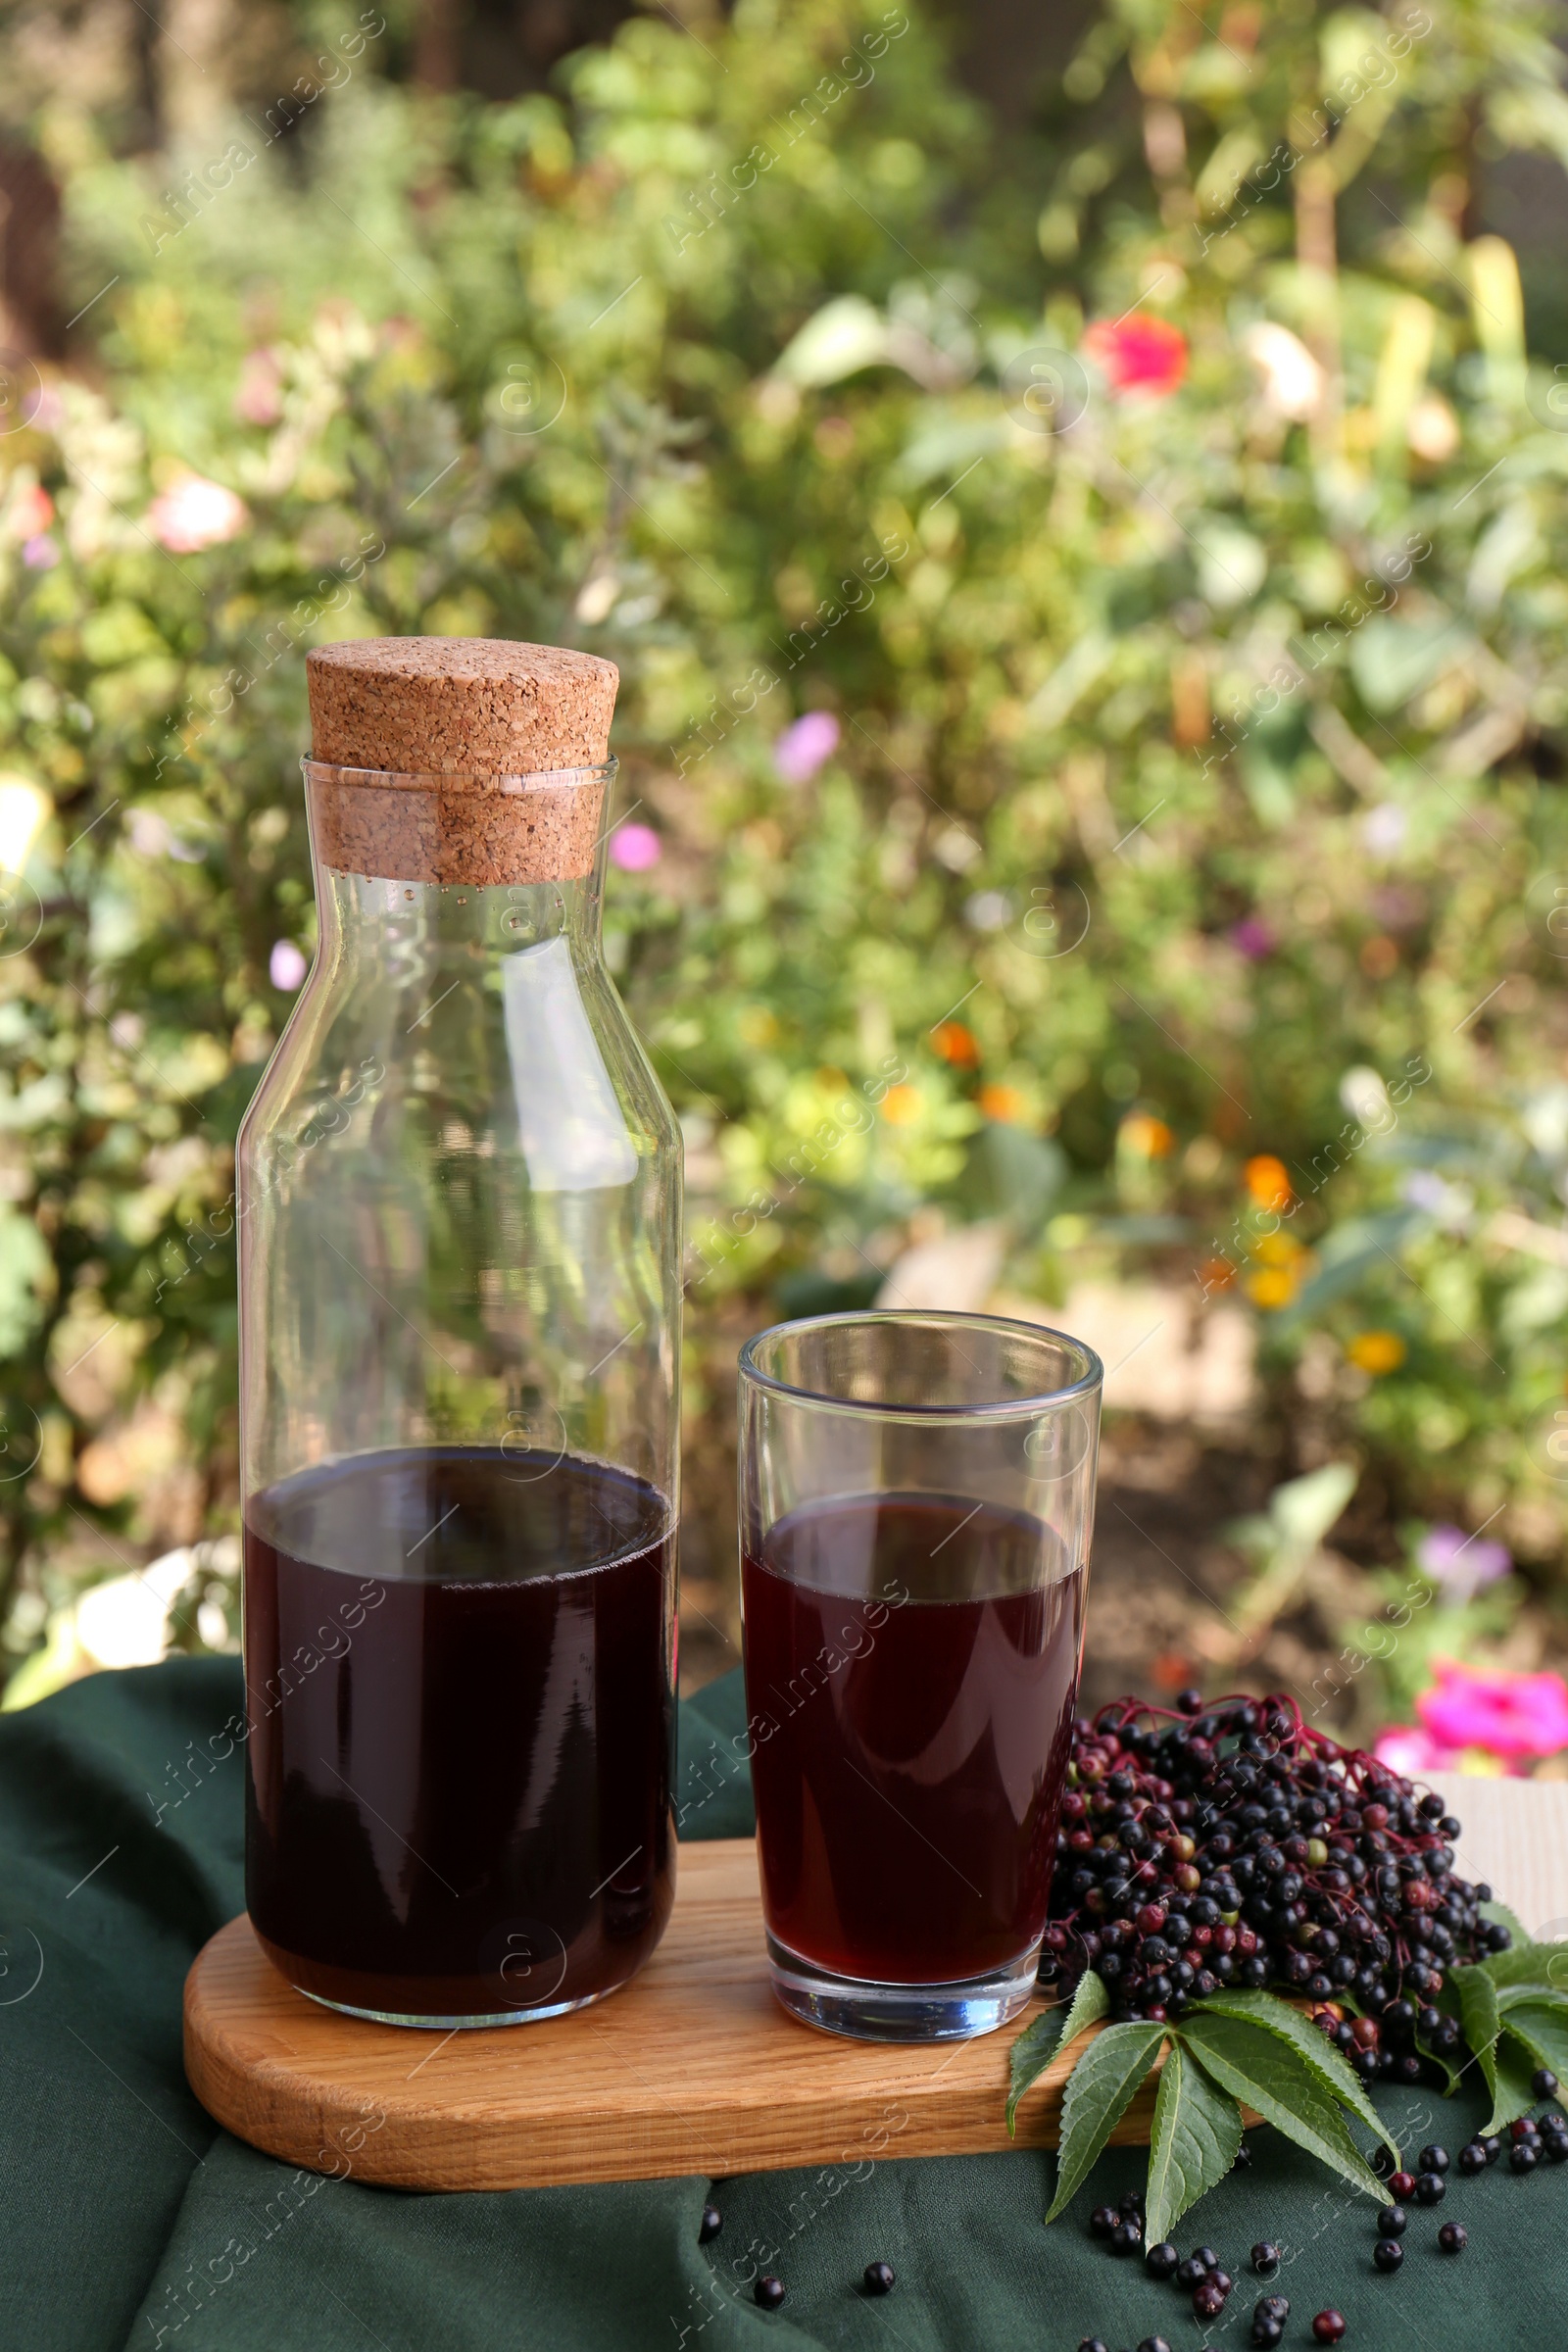 Photo of Elderberry drink and Sambucus berries on table outdoors